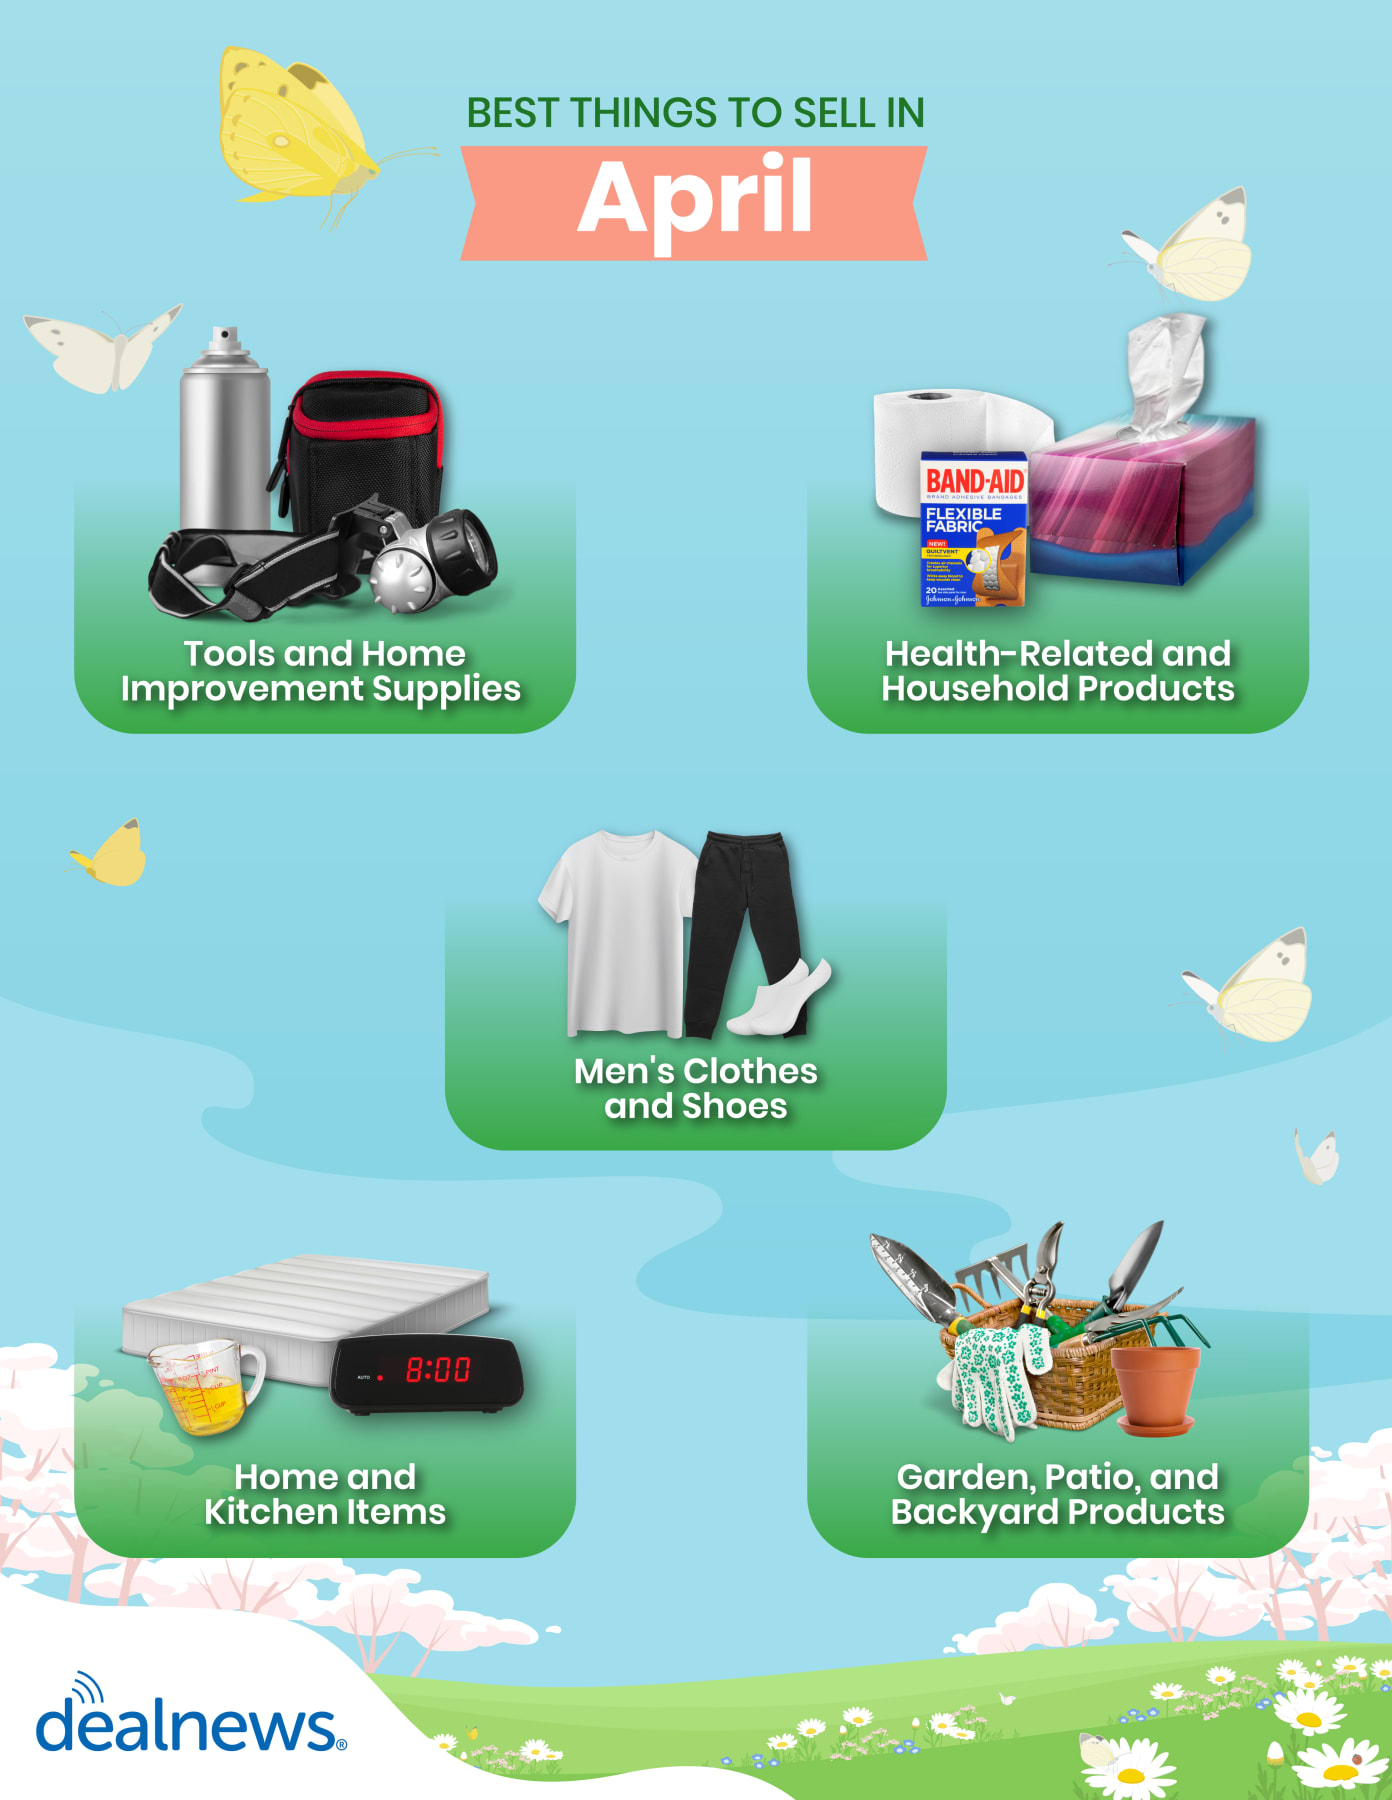 Five of the best things to sell in April shown in infographic.